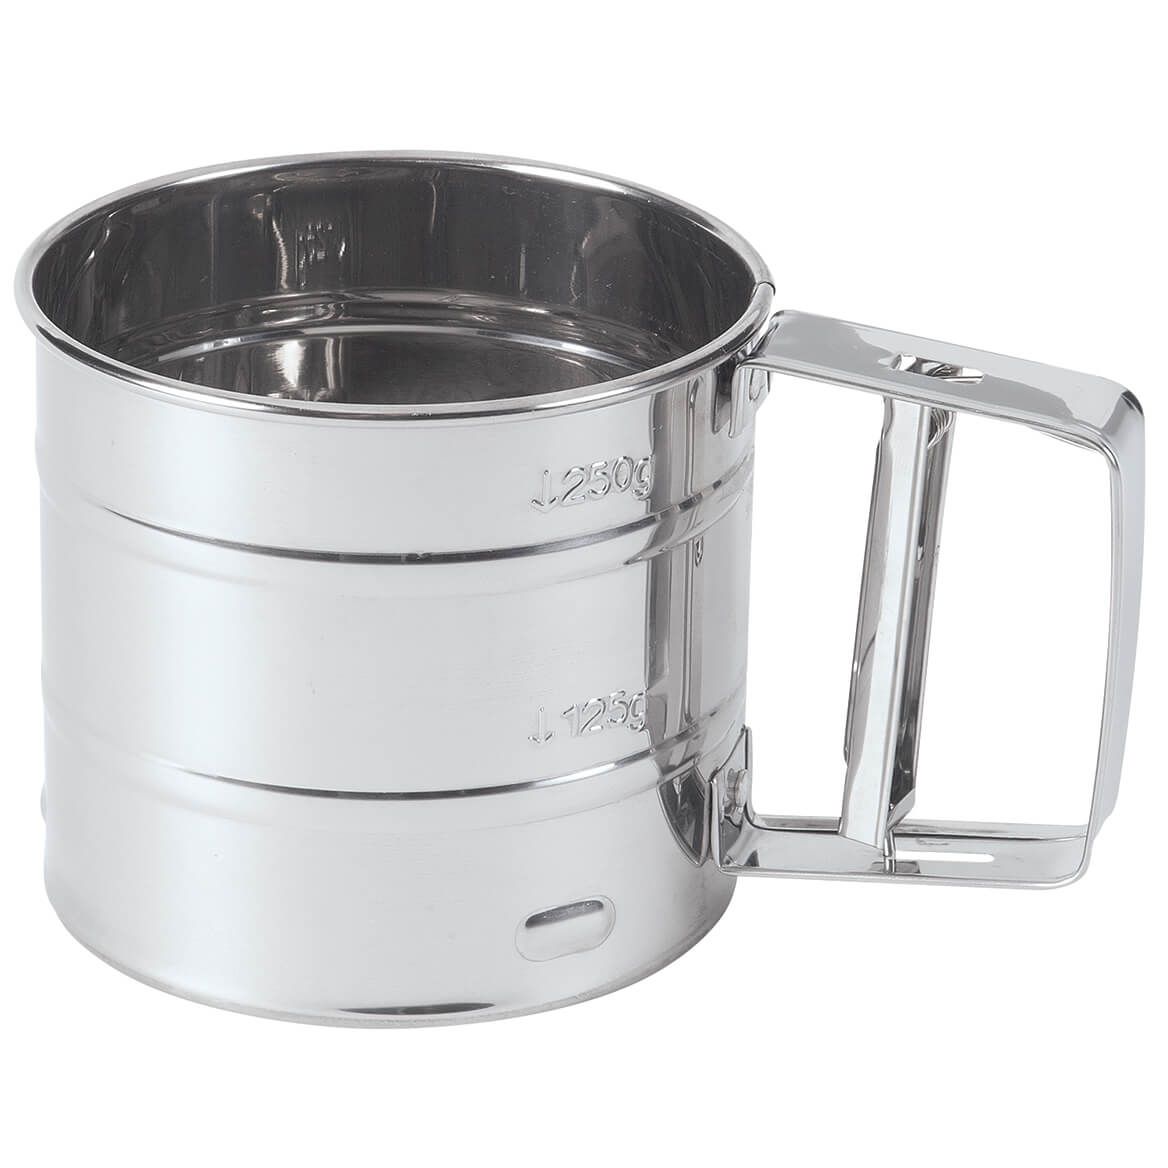 Stainless Steel Handheld Sifter + '-' + 376569